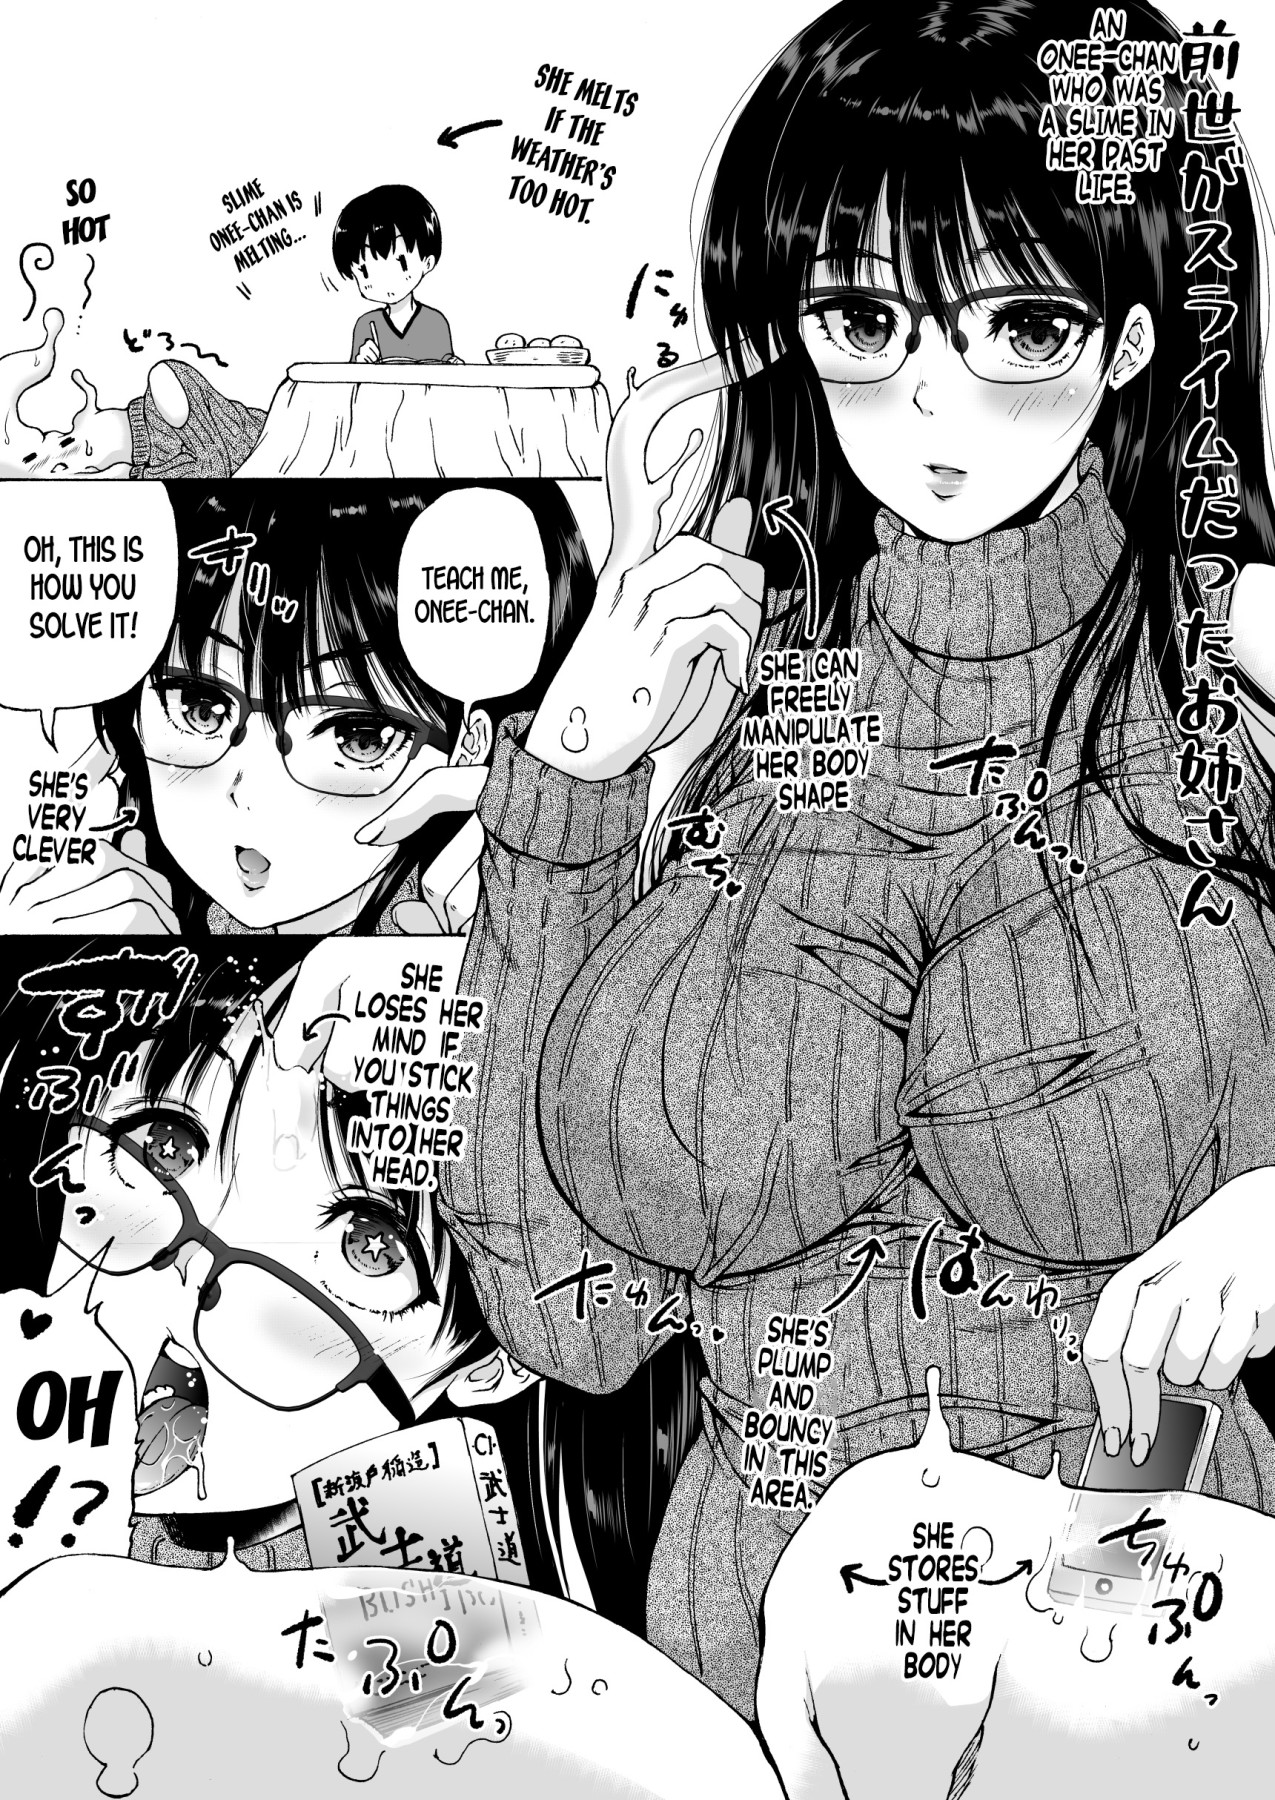 hentai manga The Story Of An Onee-san Who Was A Slime In Her Previous life